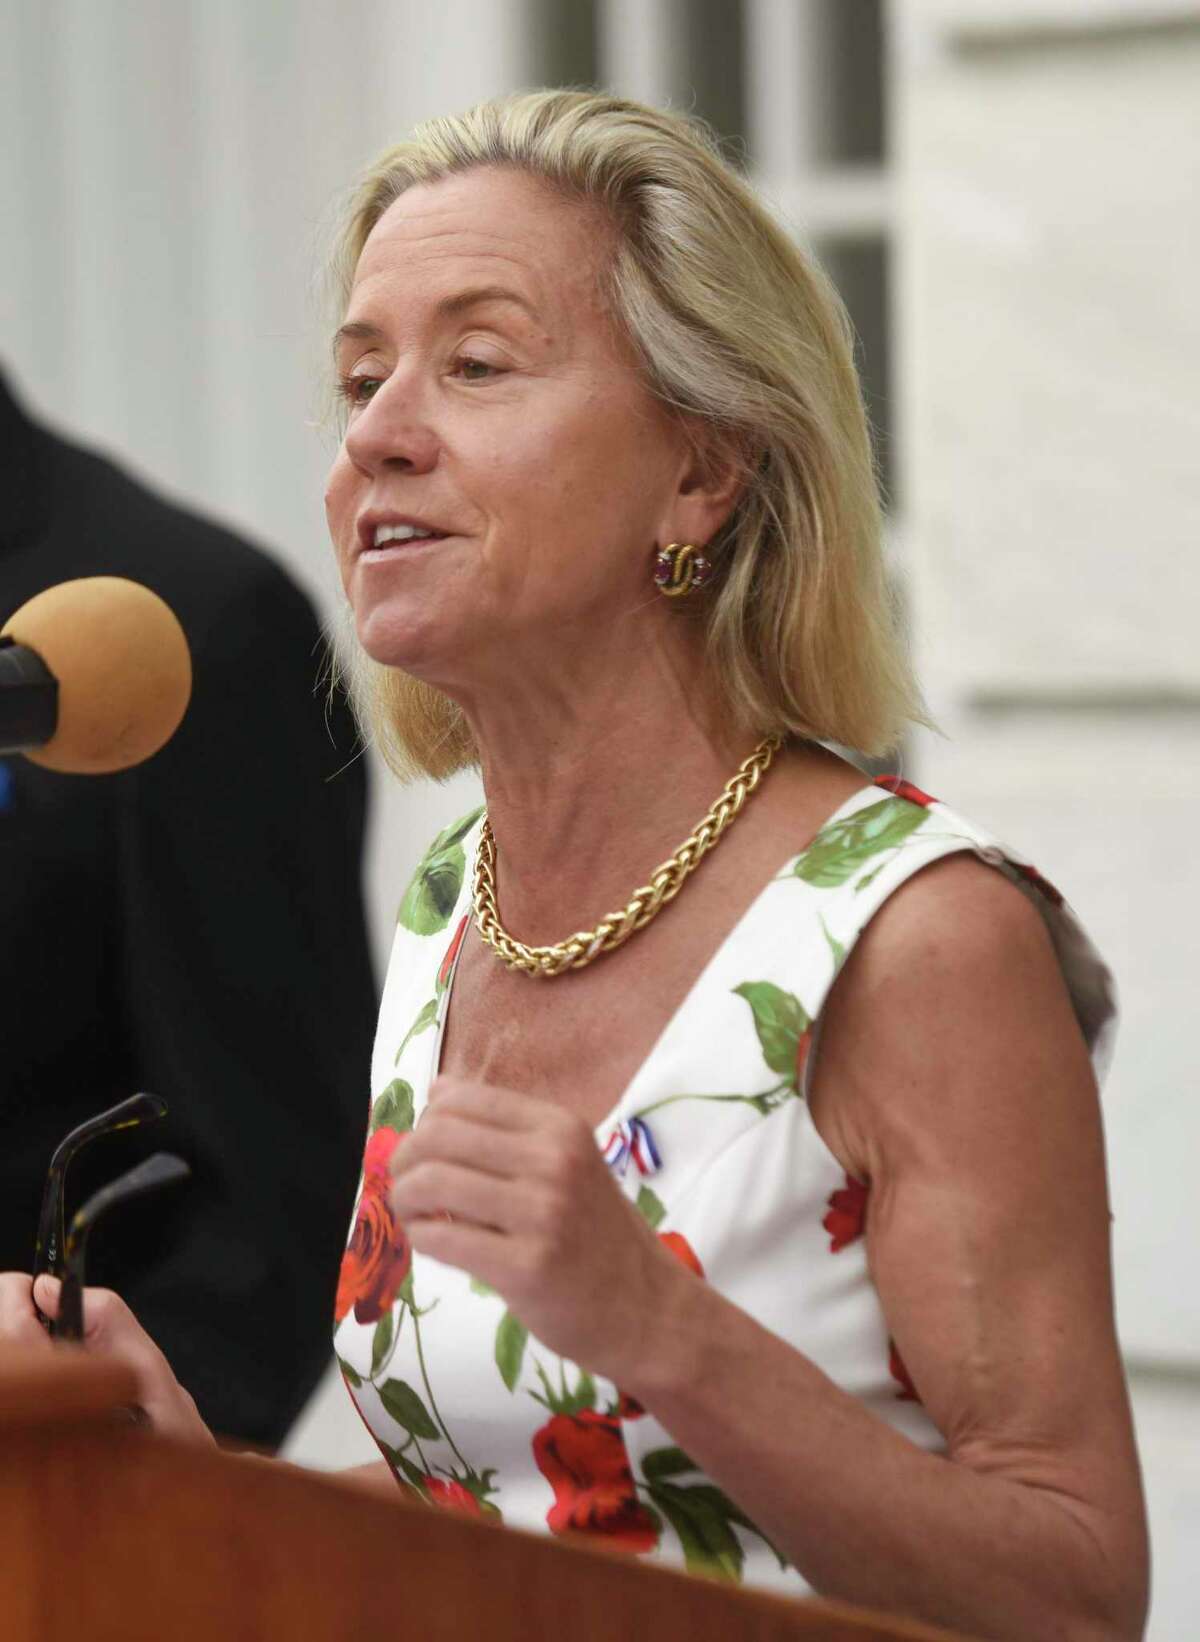 Alliance Française of Greenwich President Renée Amory Ketcham speaks at the Bastille Day flag-raising ceremony at Town Hall in Greenwich on July 14, 2016.